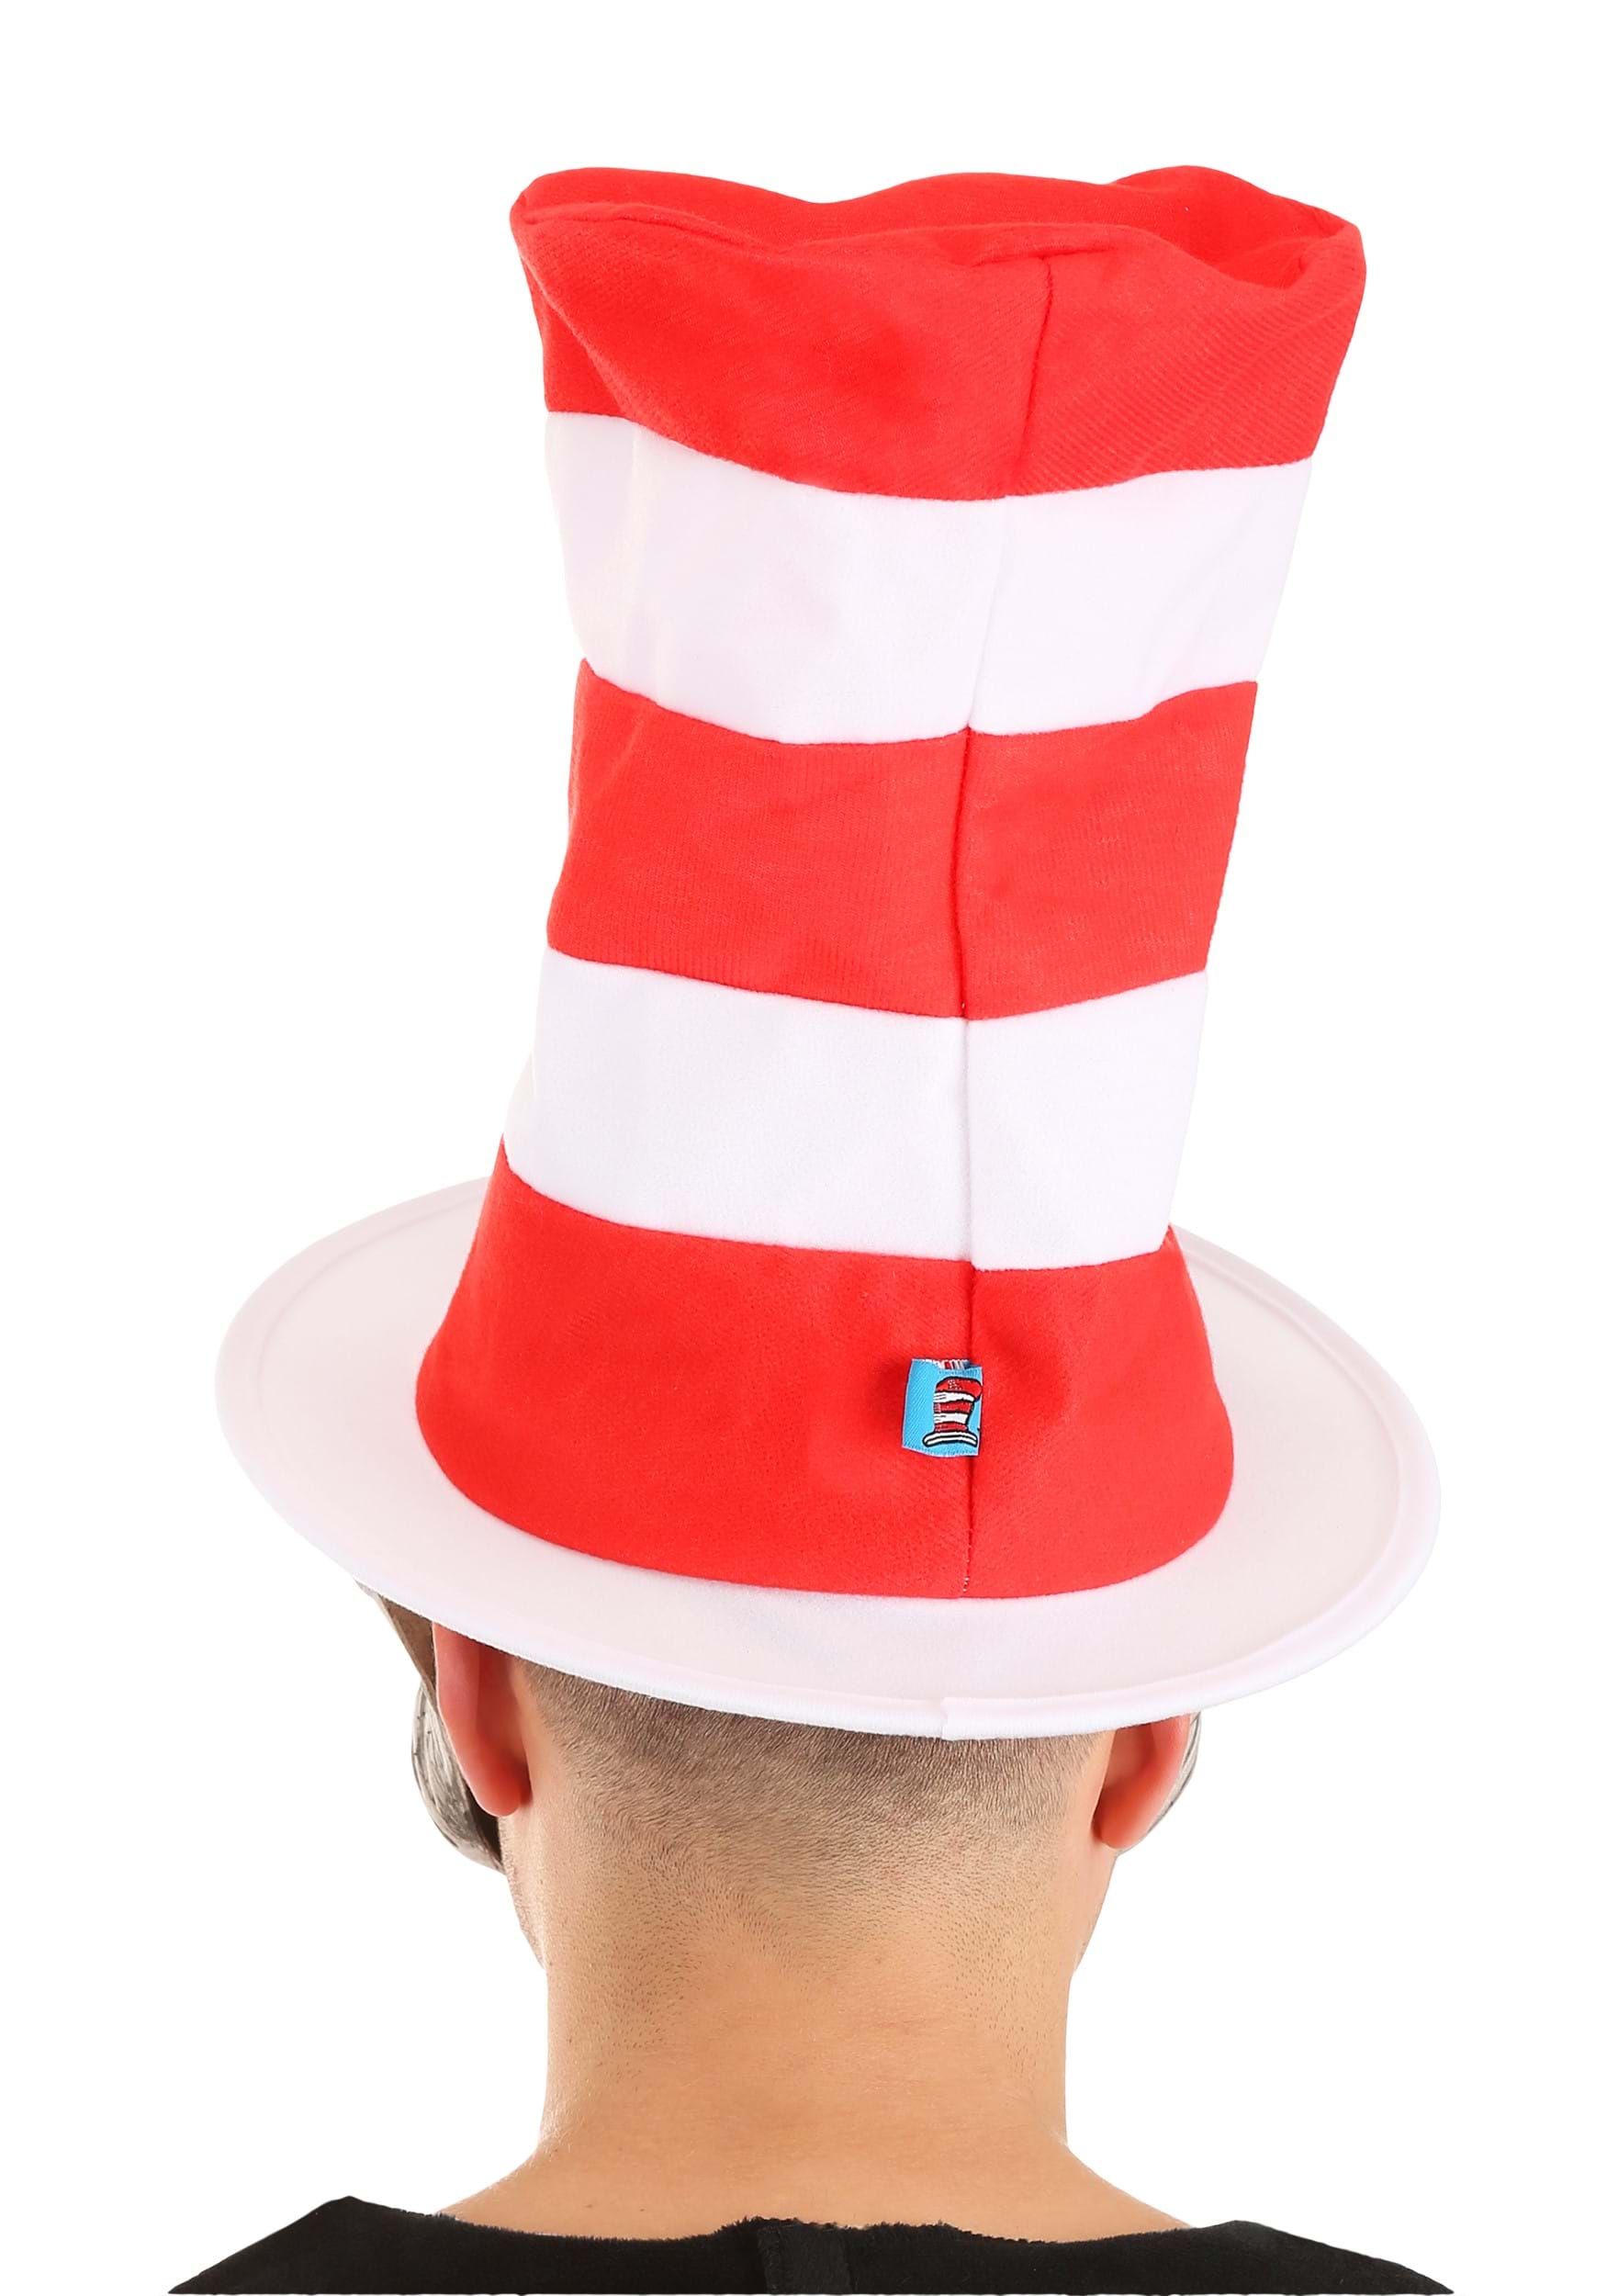 The Cat In The Hat Latex Mask & Hat Costume Kit